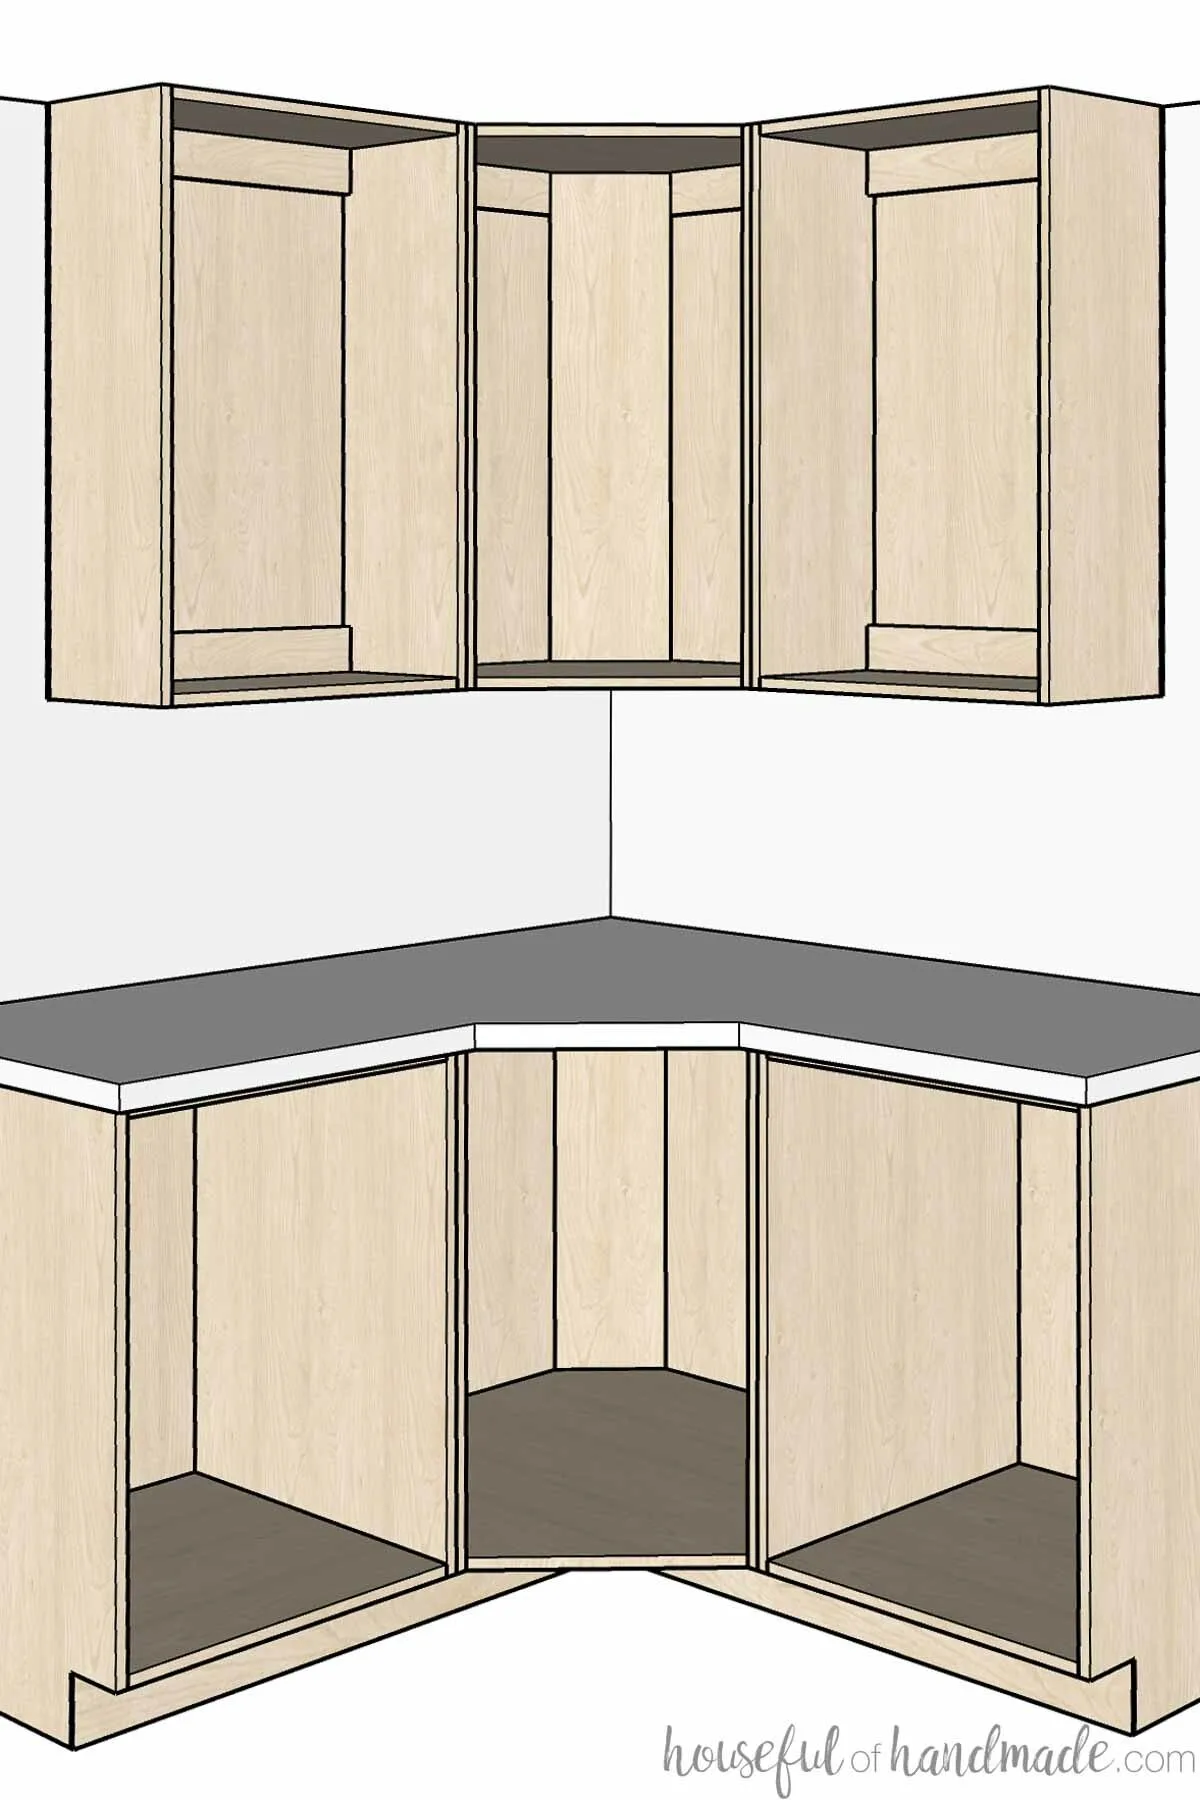 3D sketch of a corner with diagonal wall cabinets and base cabinets. 